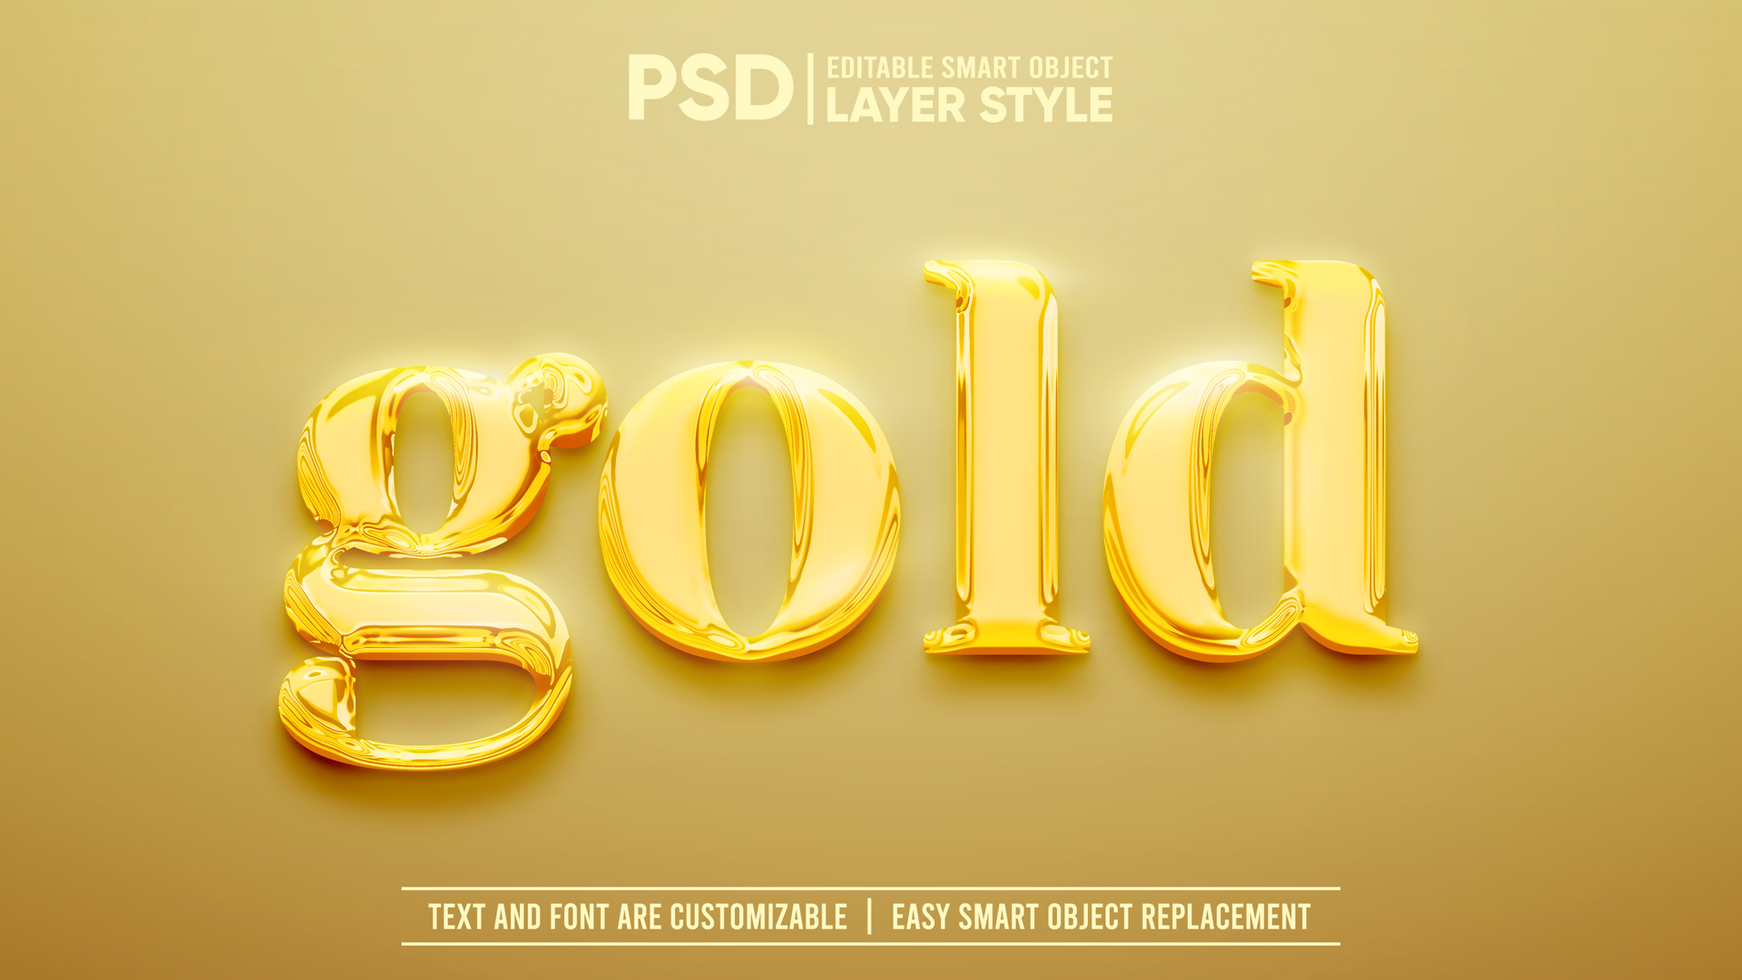 Shiny Smooth Gold with Flare Editable Smart Object Layer Text Effect Mockup psd